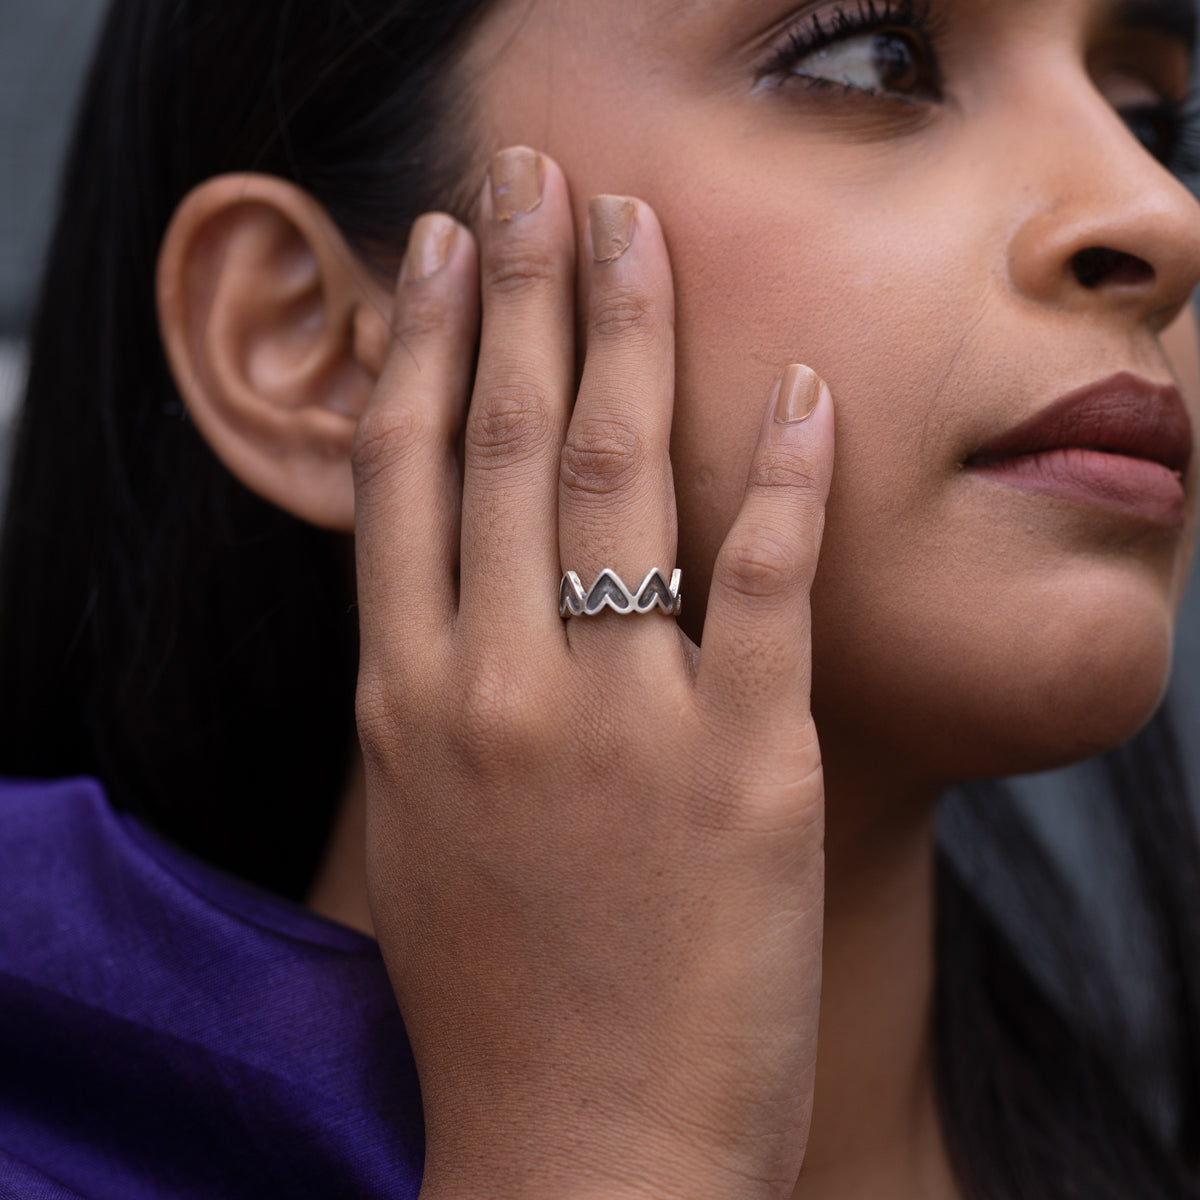 Womens Pinky Rings - Where to Buy Meghan Markle's Pinky Ring